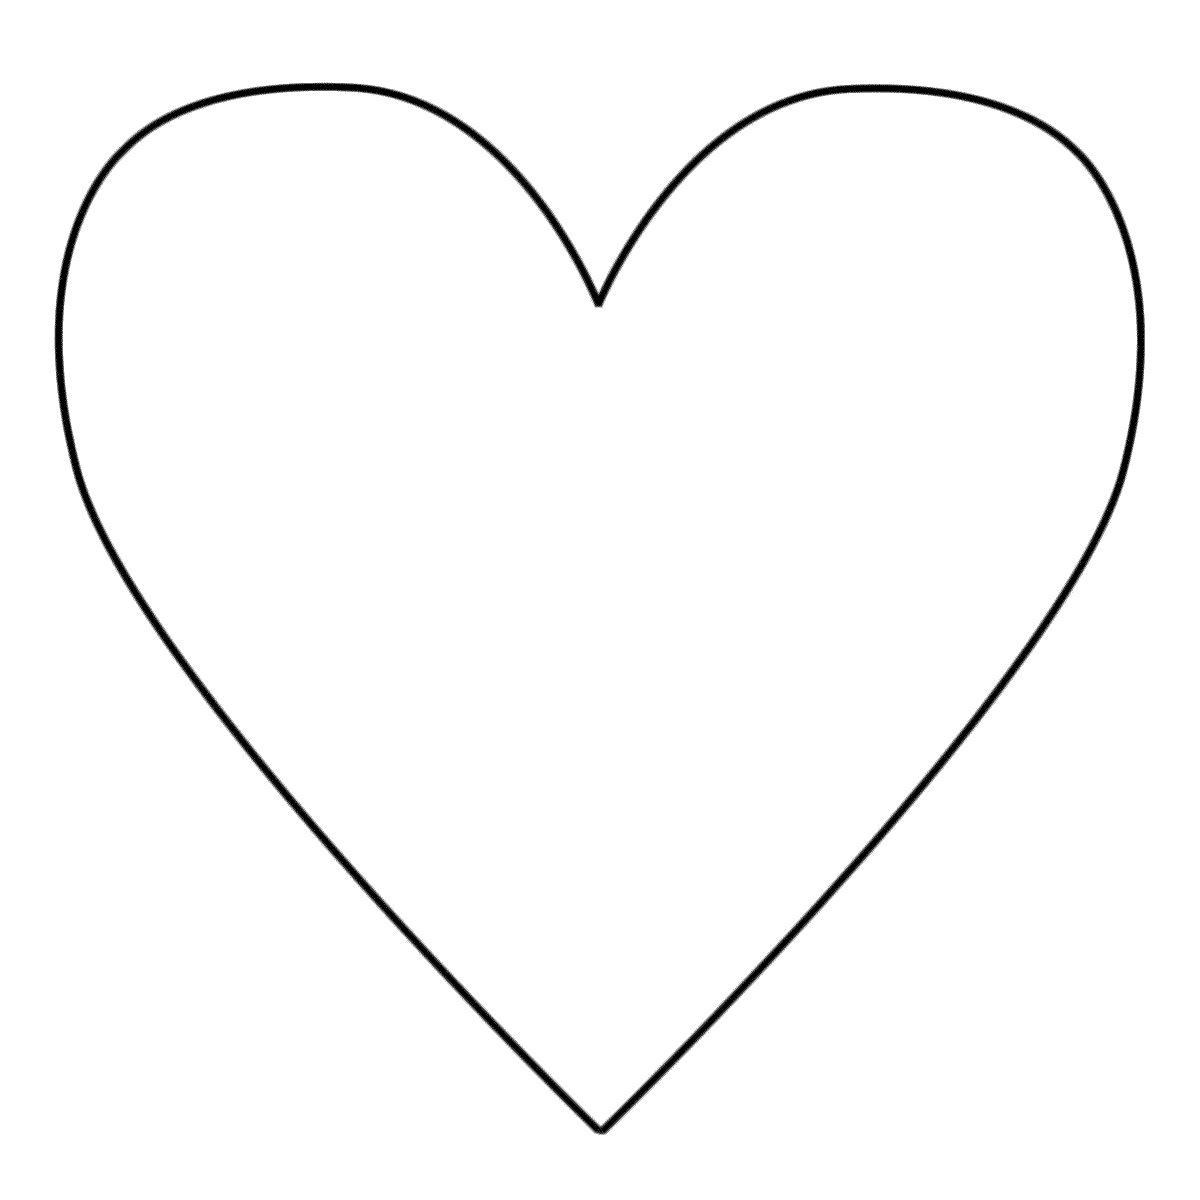 heart printable coloring pages locked heart coloring page free printable coloring pages heart coloring pages printable 